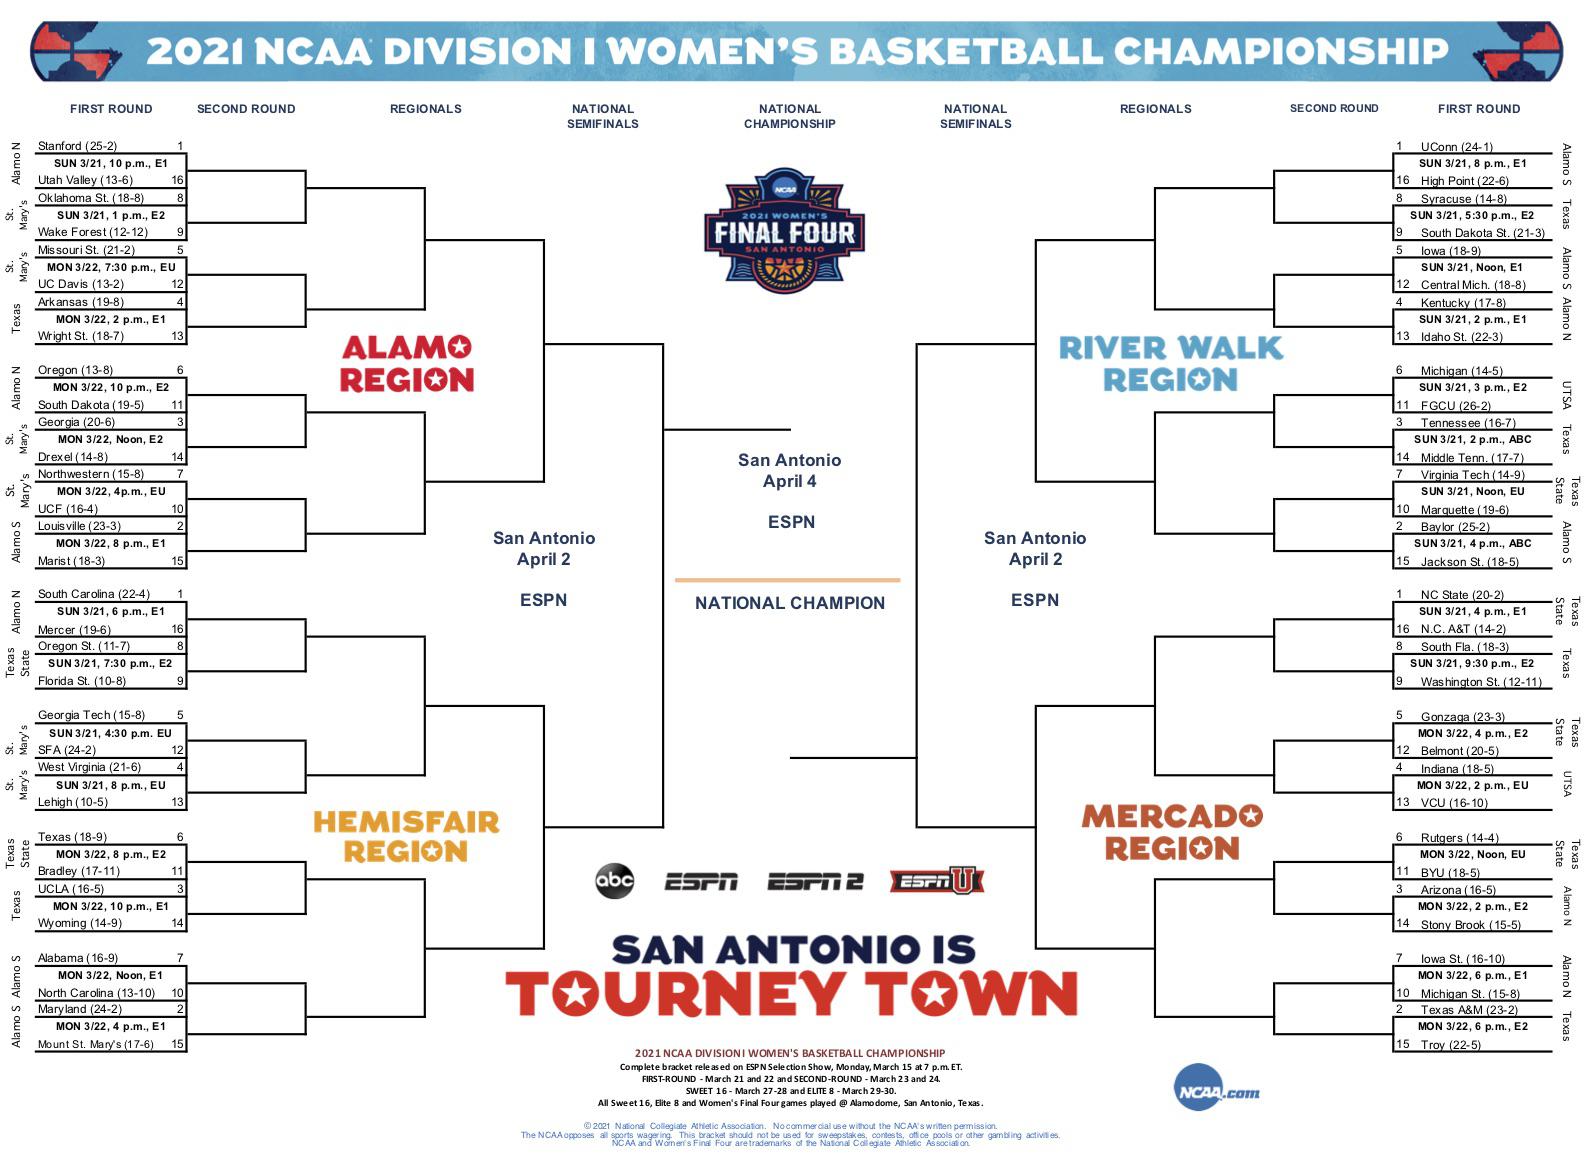 With bracket unveiled, stage set for NCAA women’s tournament in San Antonio